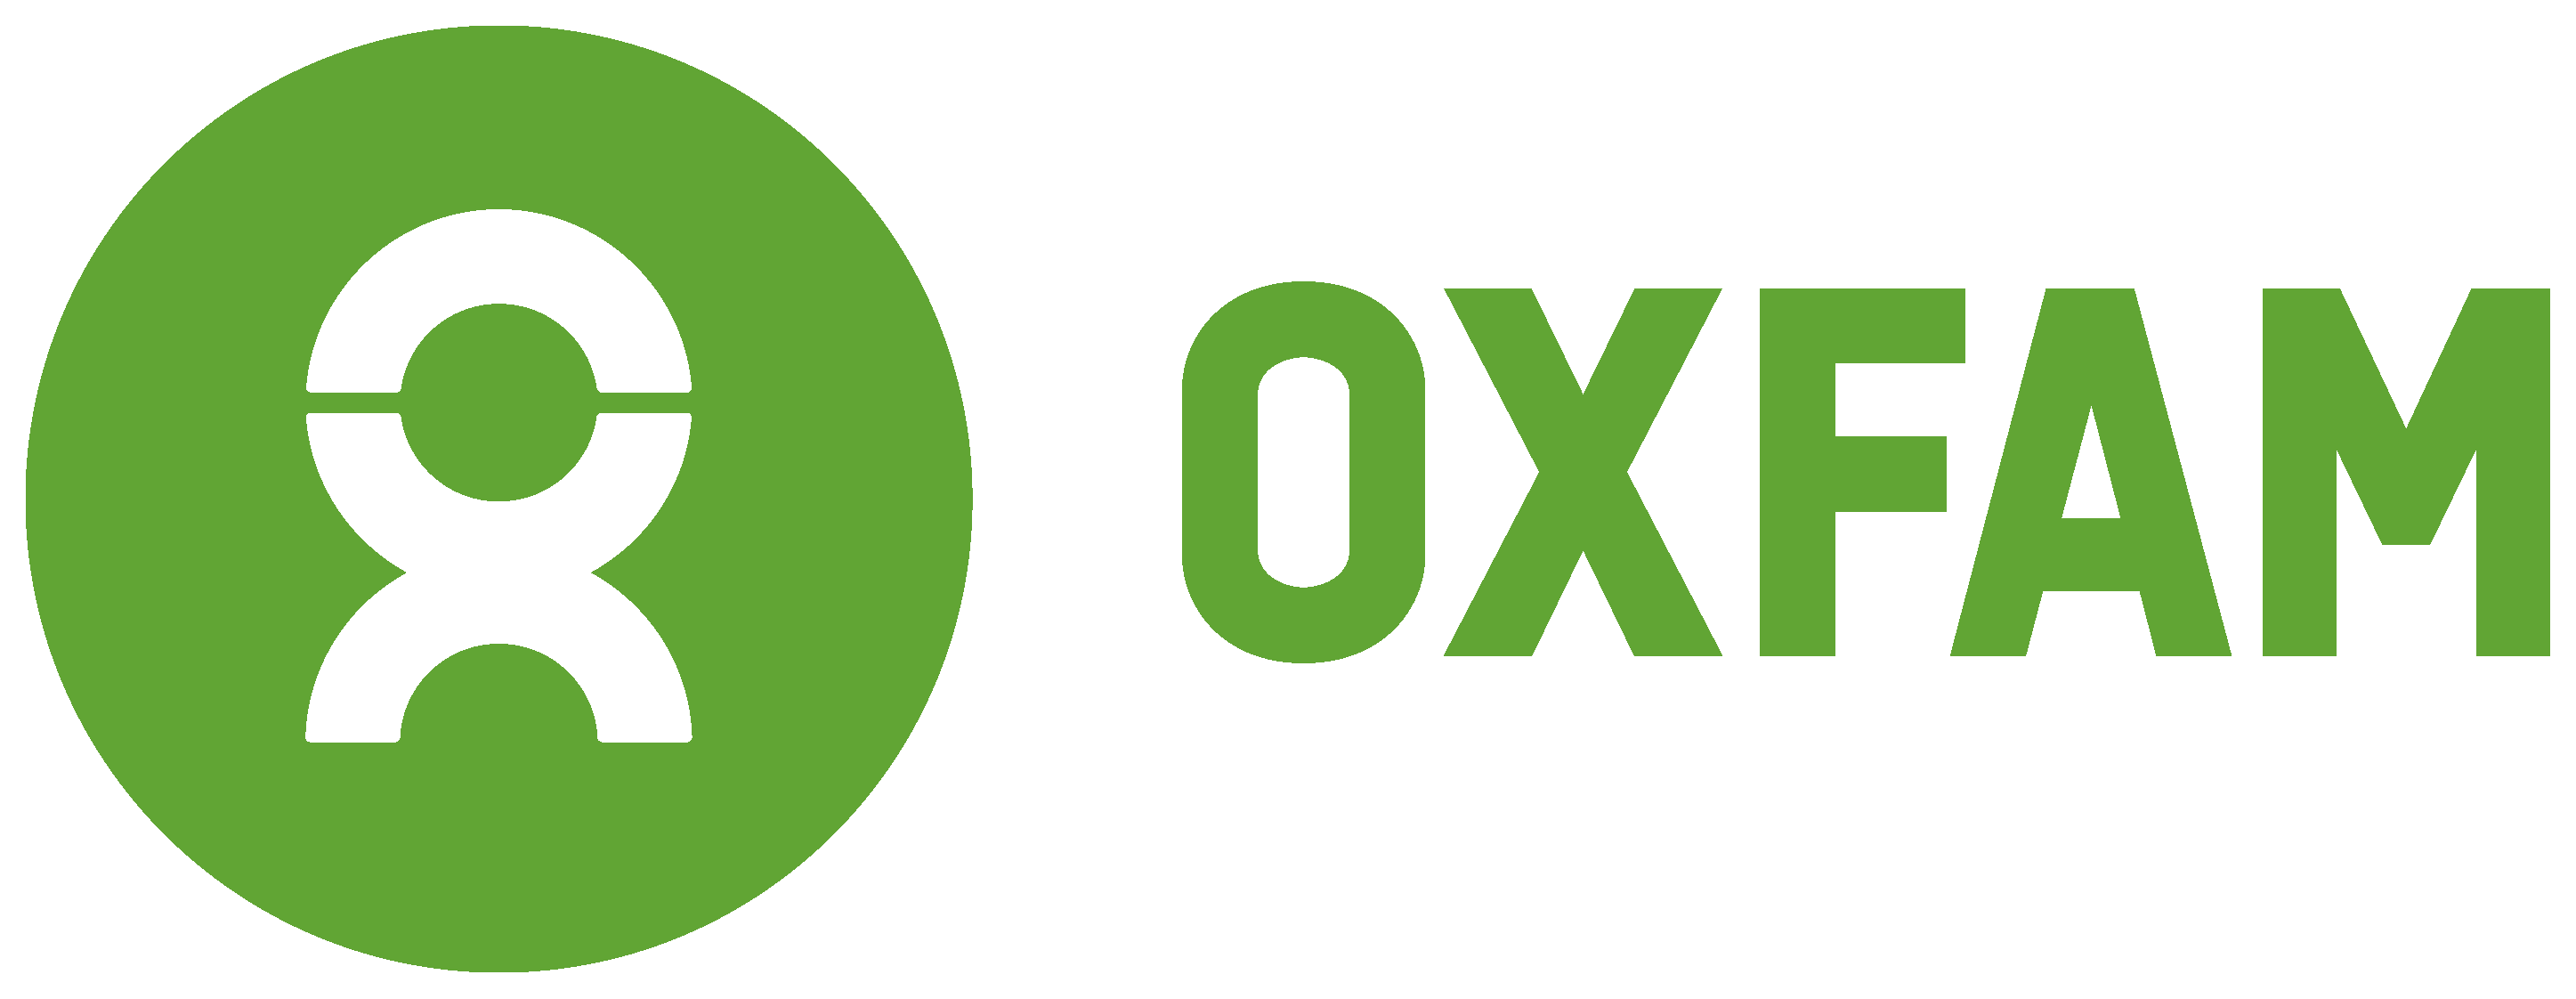 Green Oxfam logo on clear background, linking to website